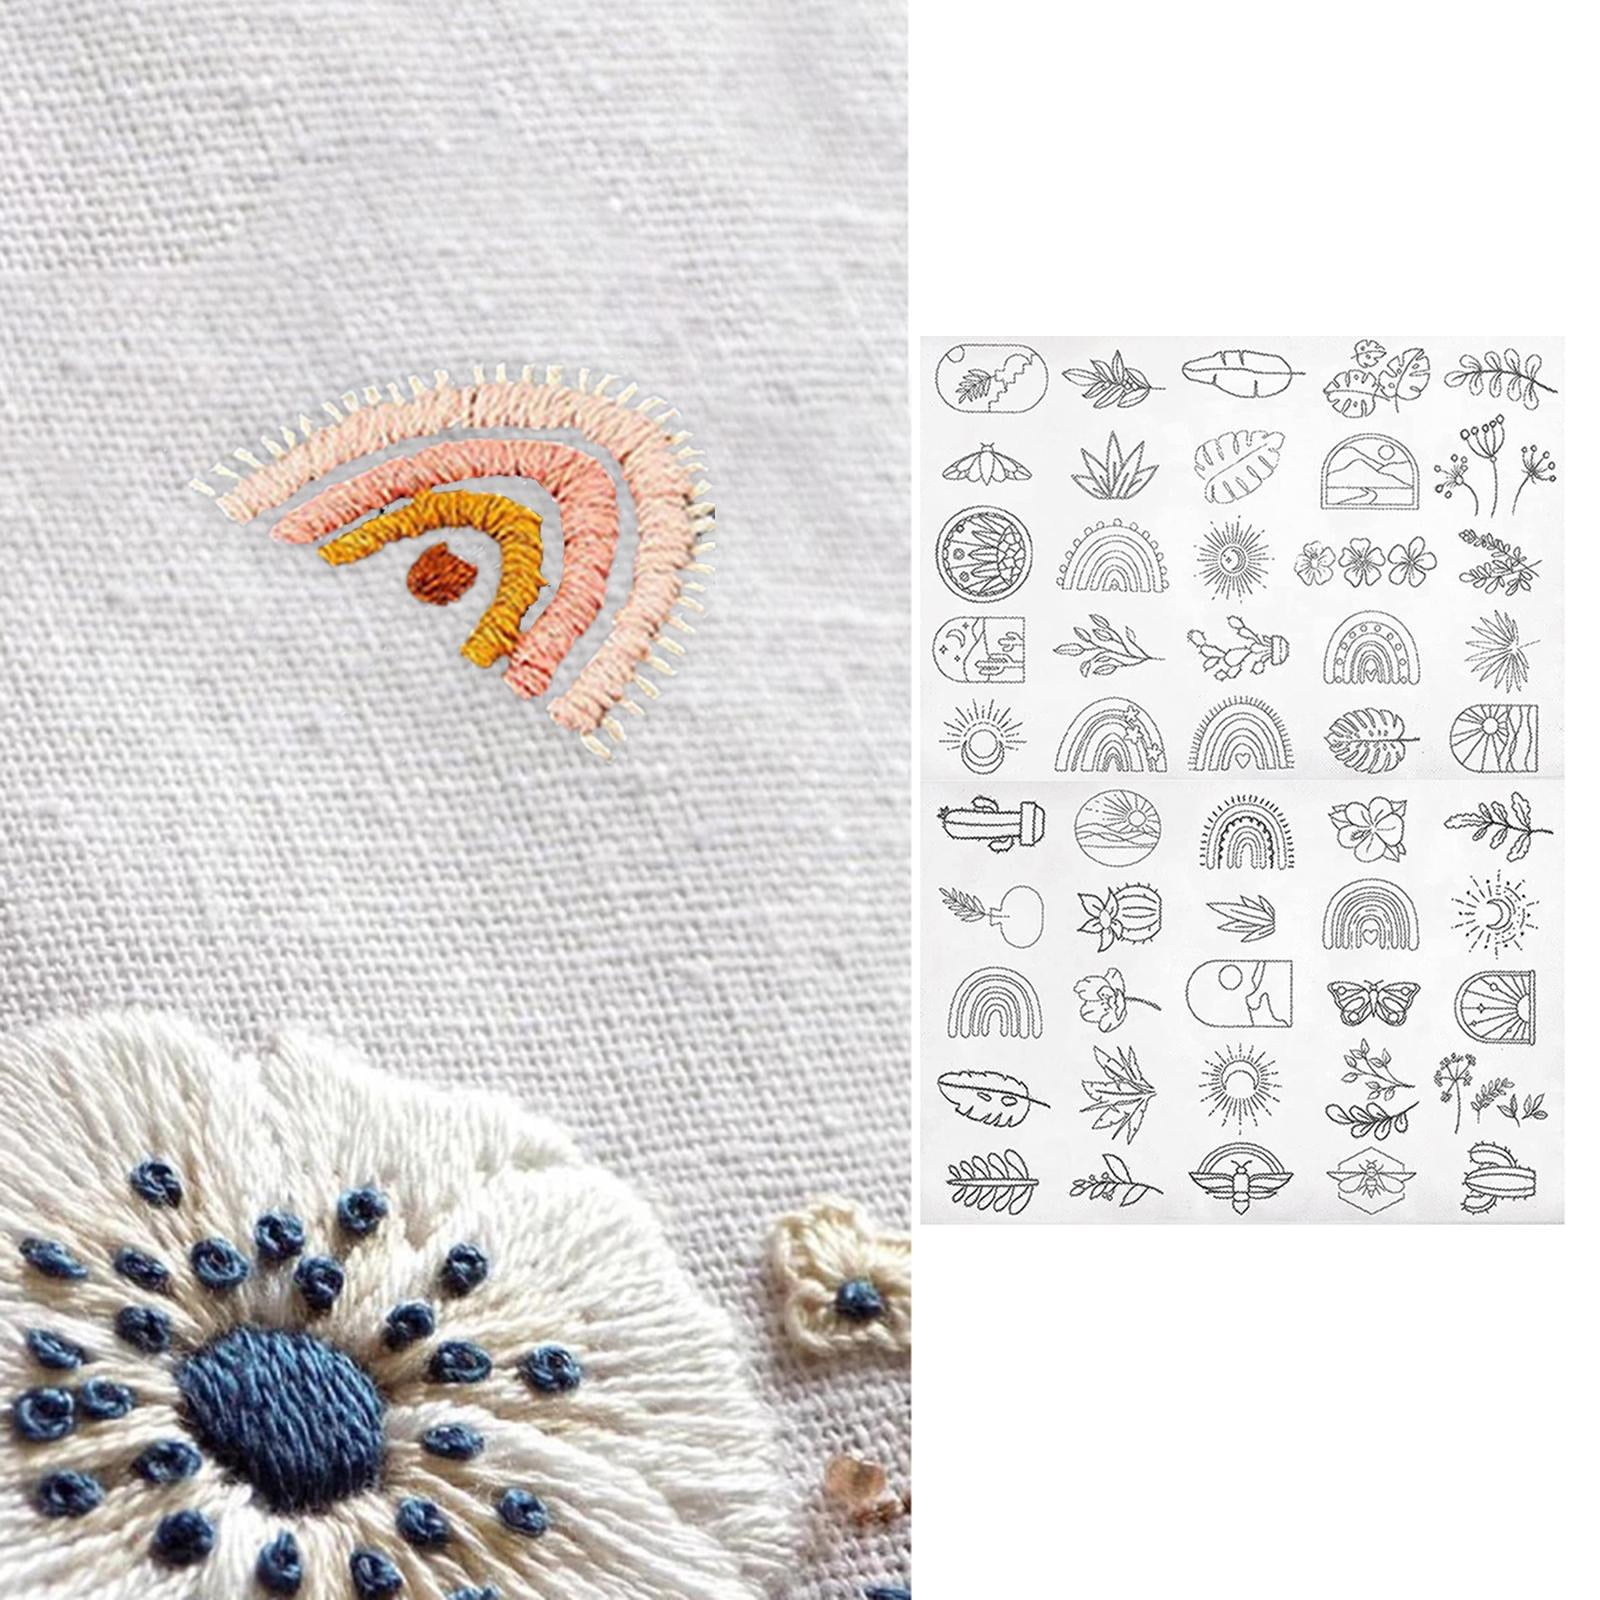 ZQmino 66Pcs Stick and Stitch Embroidery Patches Water Soluble Stabilizer  for Embroidery Tear Away Embroidery Stabilizers with Flower Patterns for